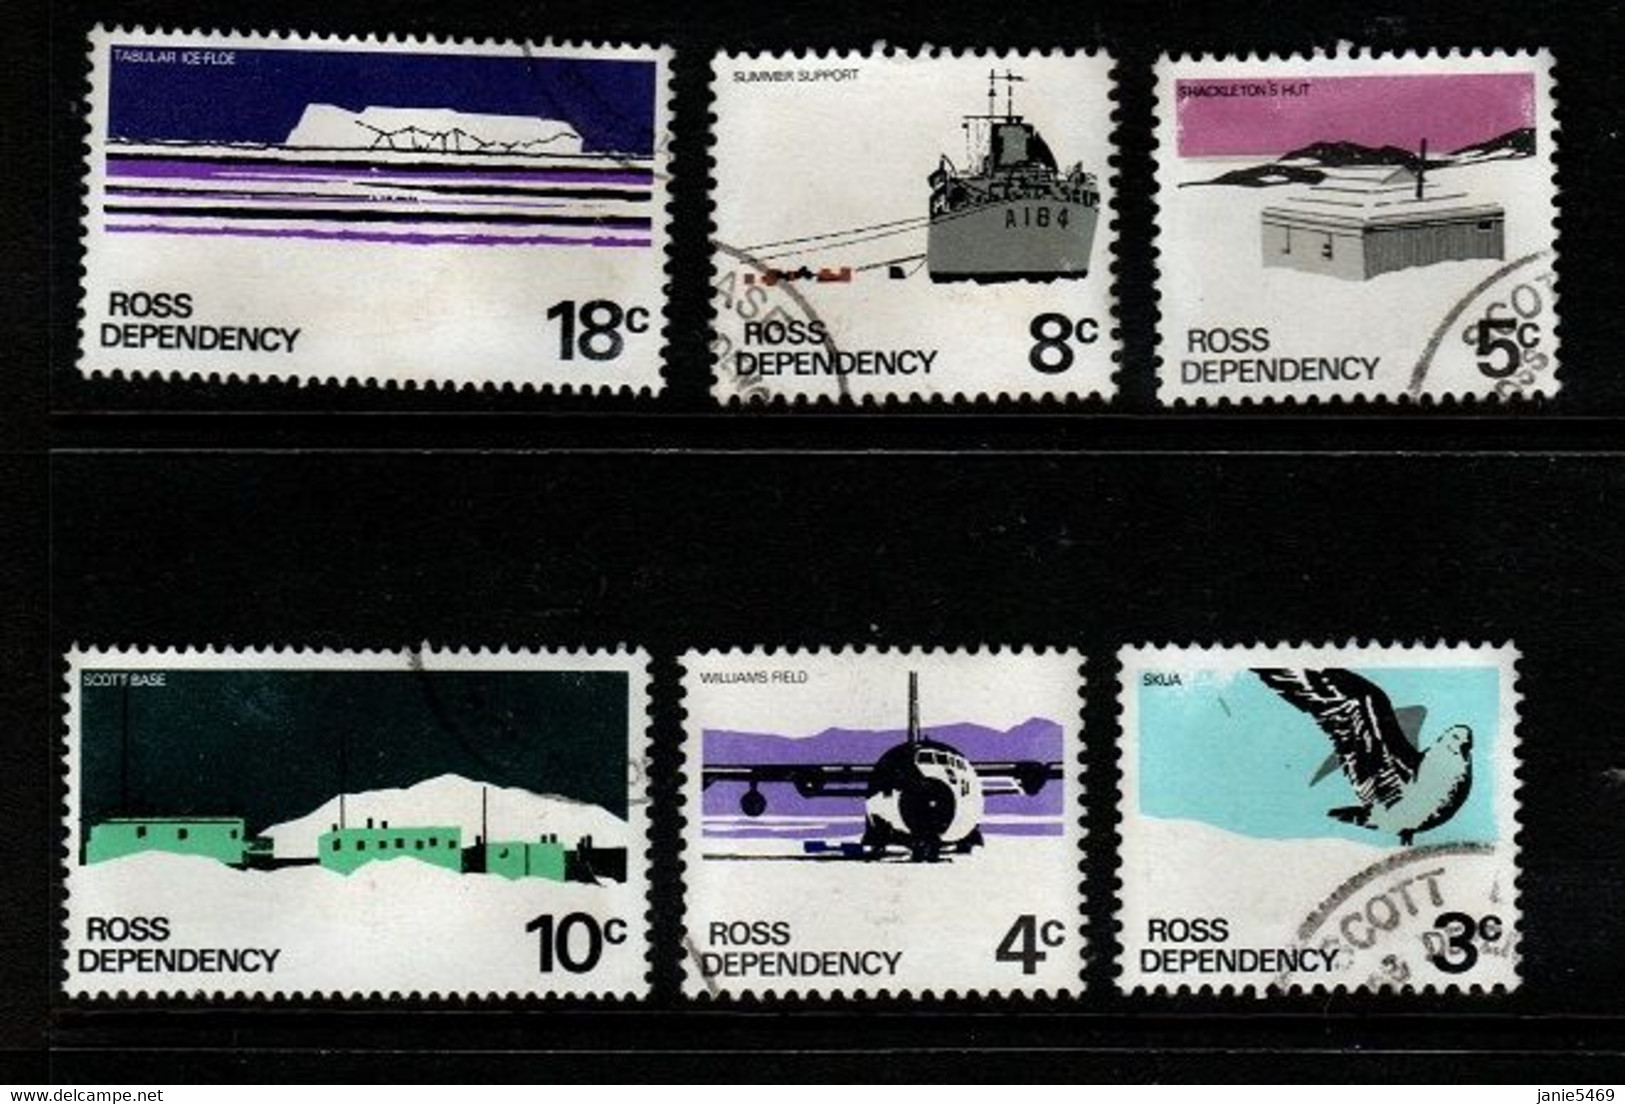 Ross Dependency 1972 Definitives Used Set - Used Stamps